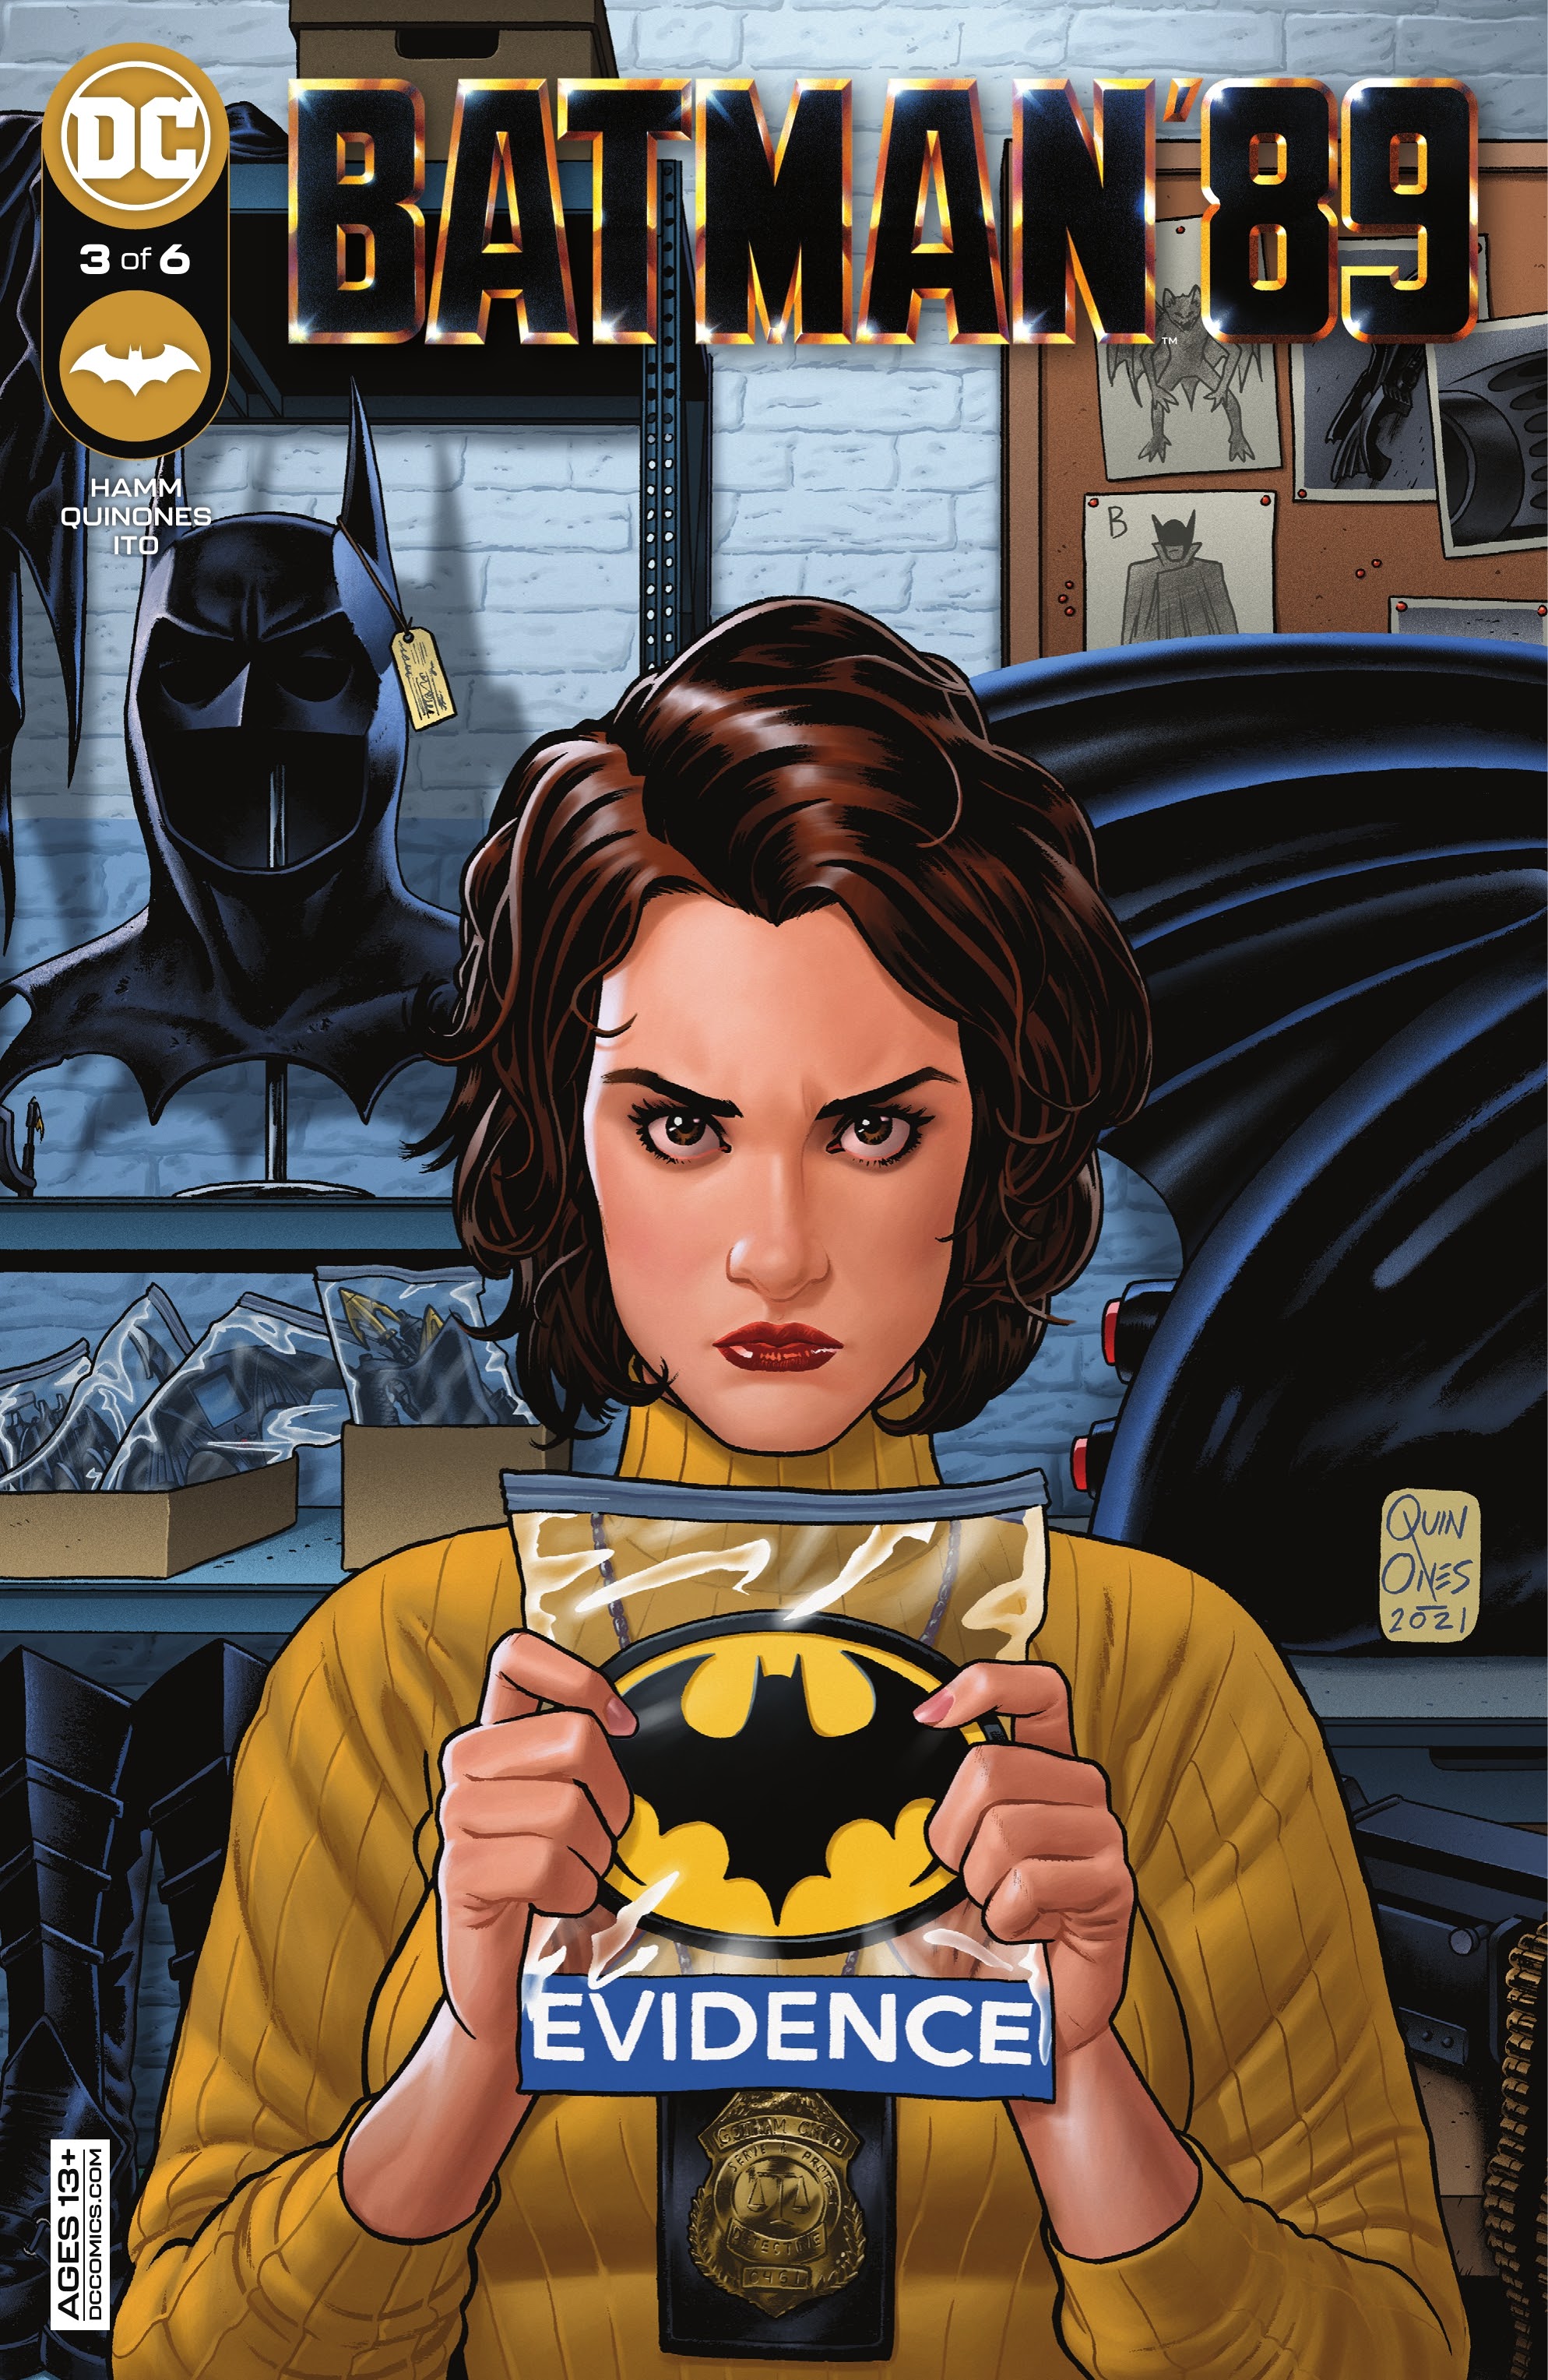 Batman 89 Issue 3 | Read Batman 89 Issue 3 comic online in high quality.  Read Full Comic online for free - Read comics online in high quality .